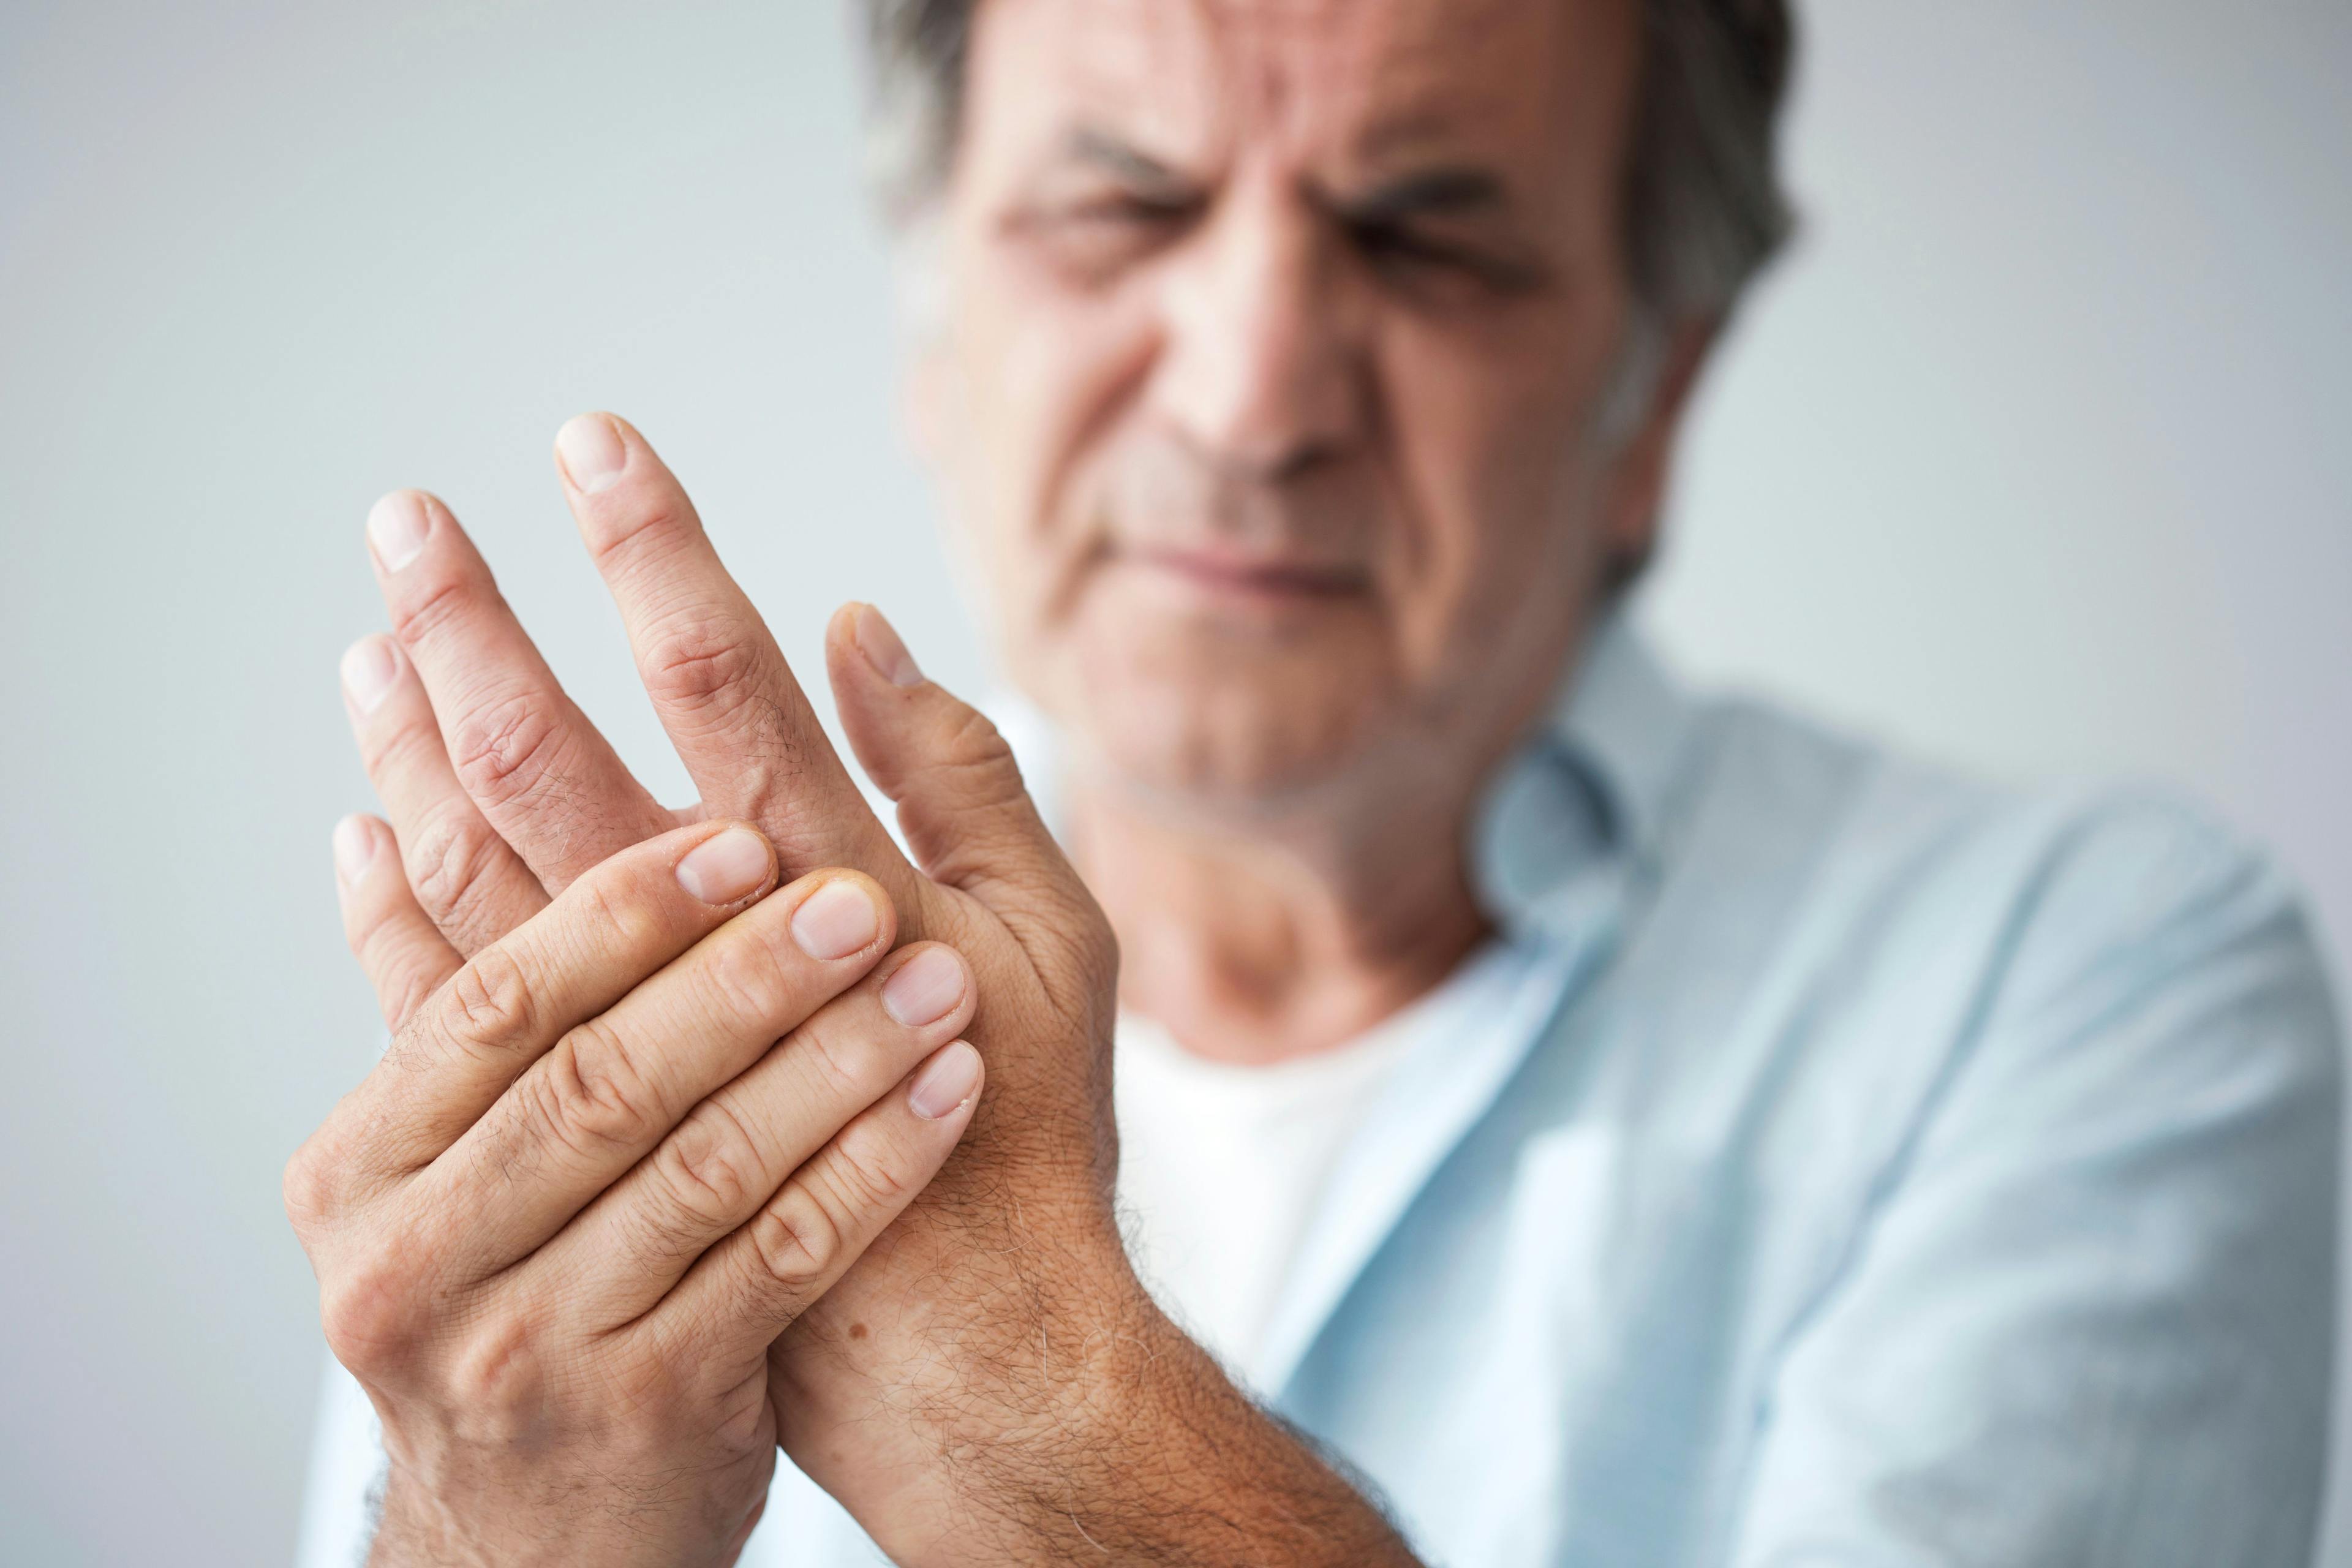 Early Achievement of Minimal Disease Activity Linked to Better Outcomes in Psoriatic Arthritis 